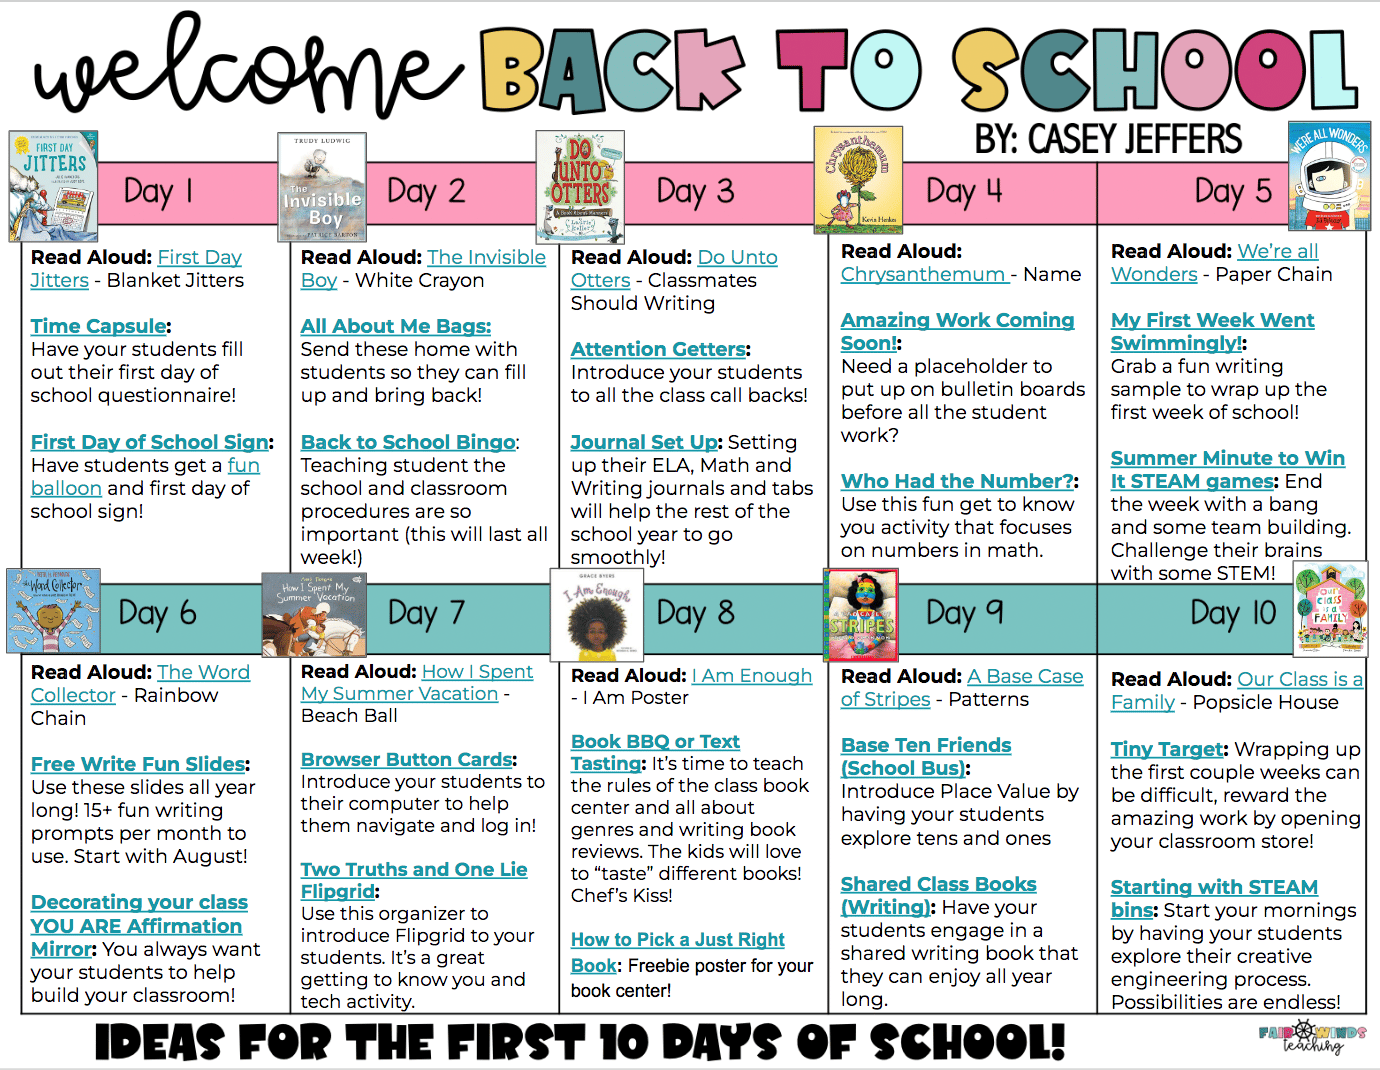 ideas for first 10 days of school